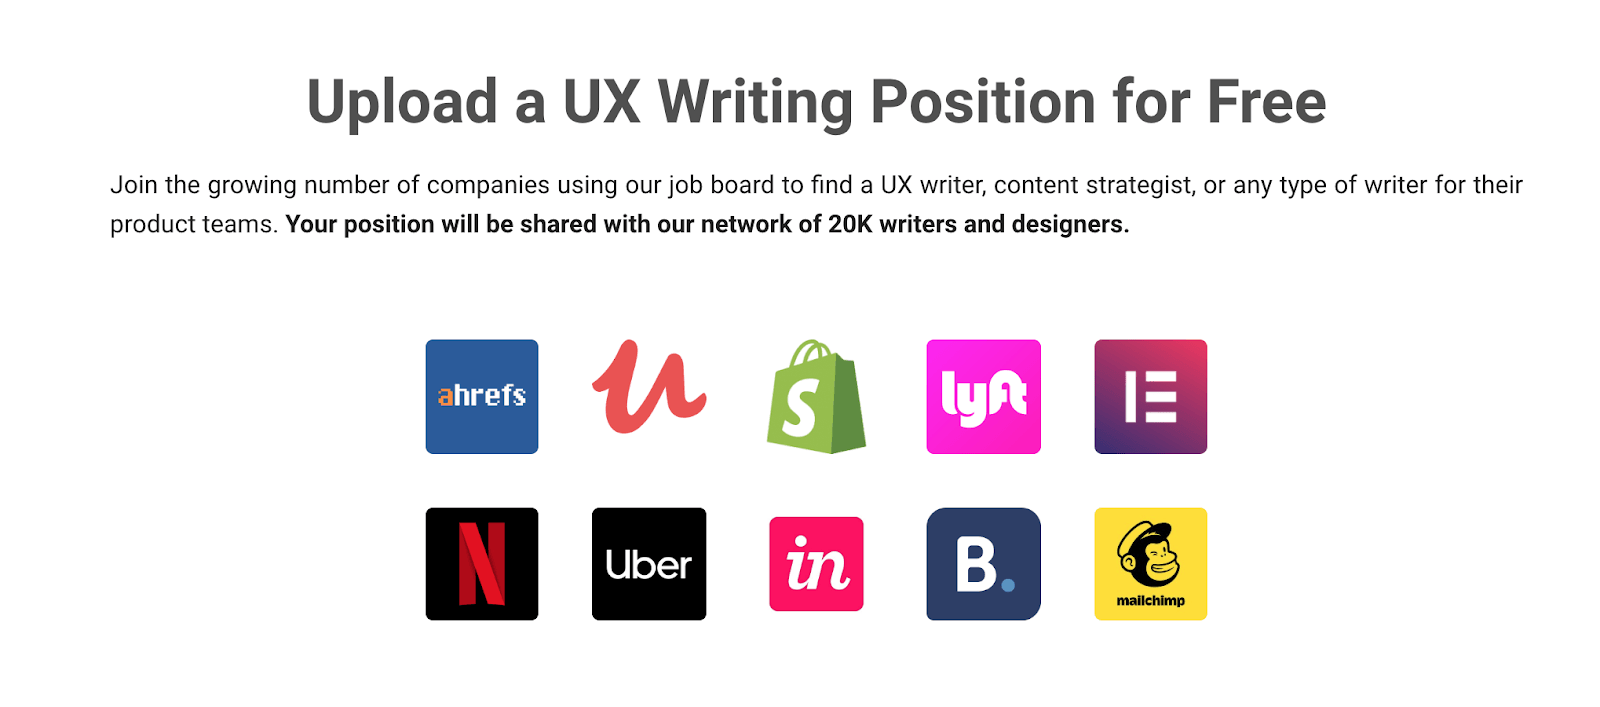 Some of the brands that have are looking for UX writers on the UX Writing Hub include Ahrefs, Netflix, Uber and Shopify.